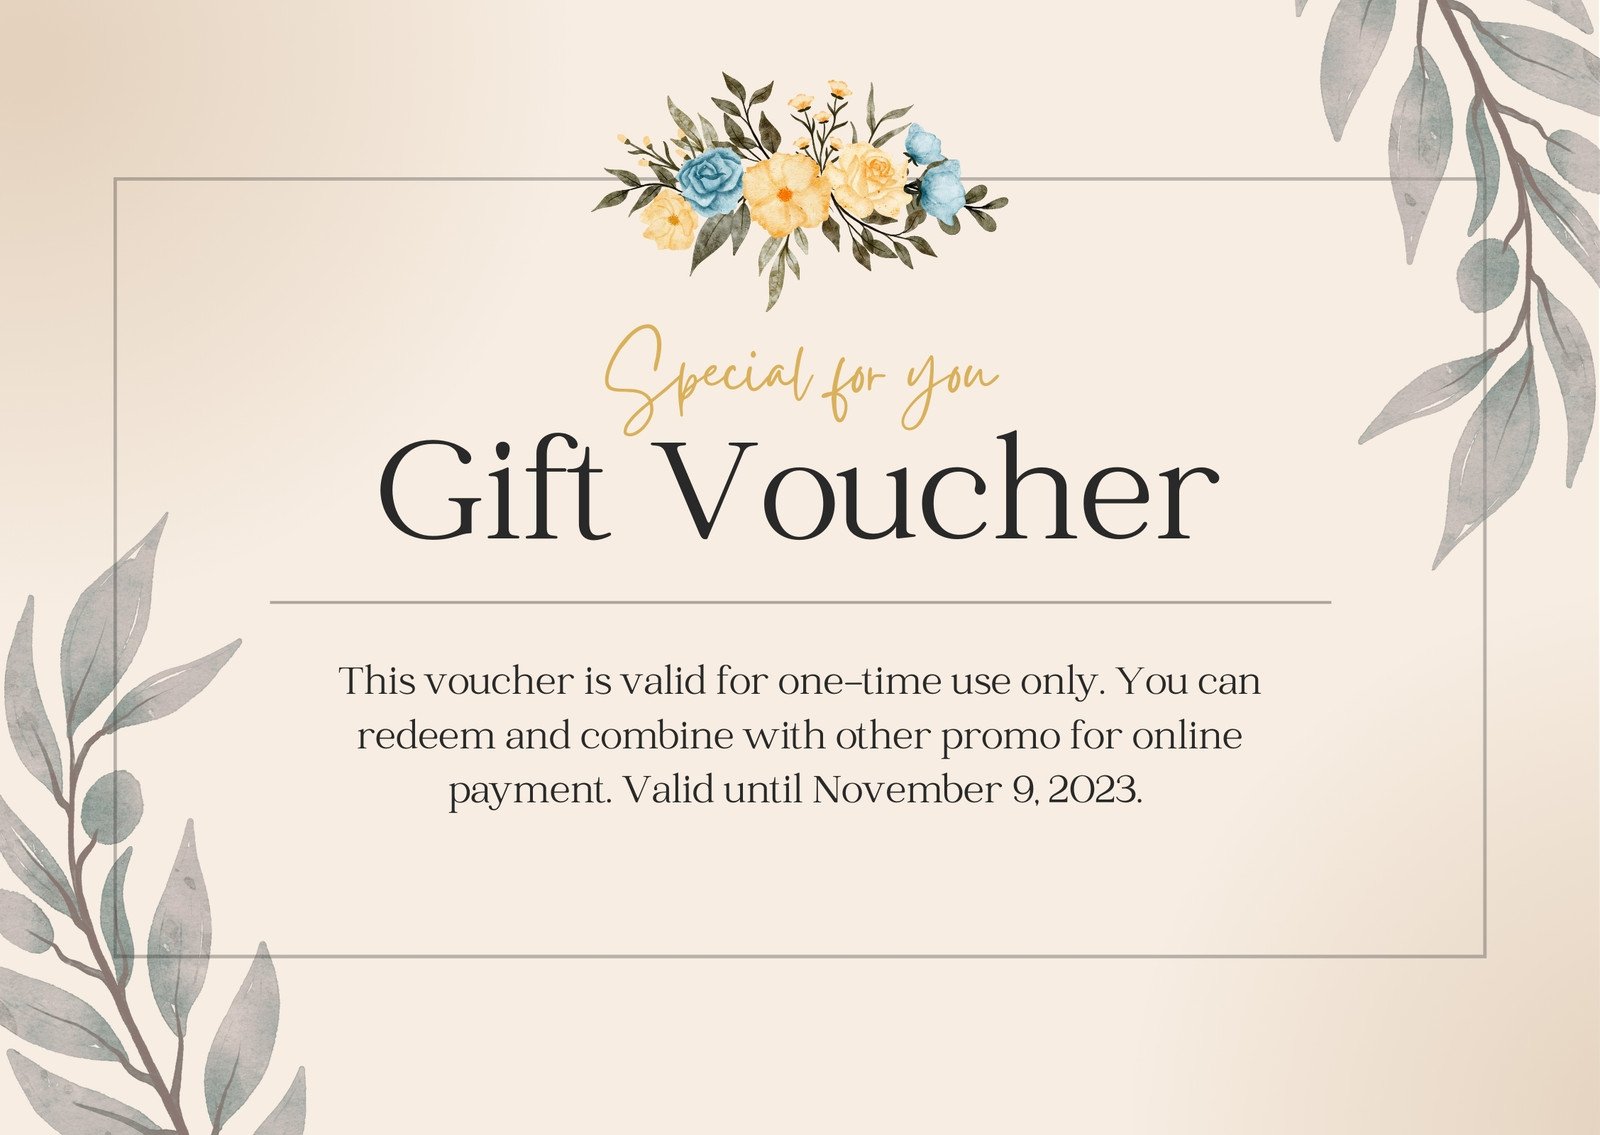 Canva Gift Certificate Template Graphic by Mycreativee · Creative